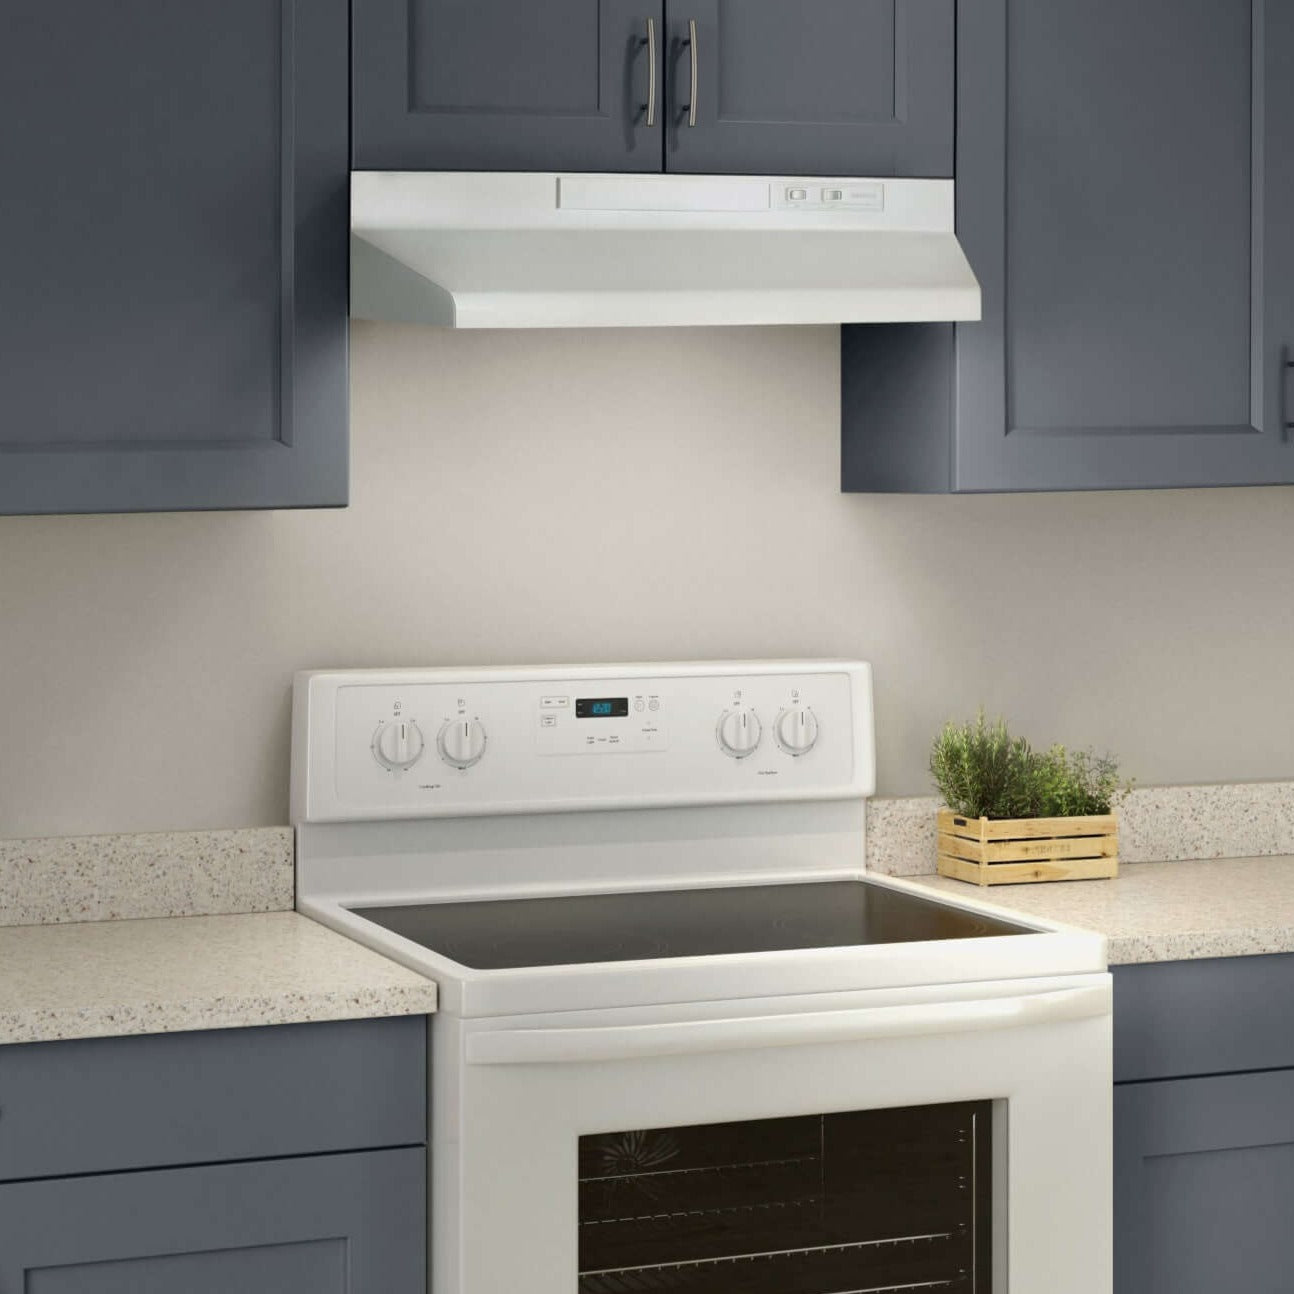 Broan F40000 Series 30 In. Two-Speed 4-Way Convertible Under Cabinet Range Hood with Color Options (F4030)